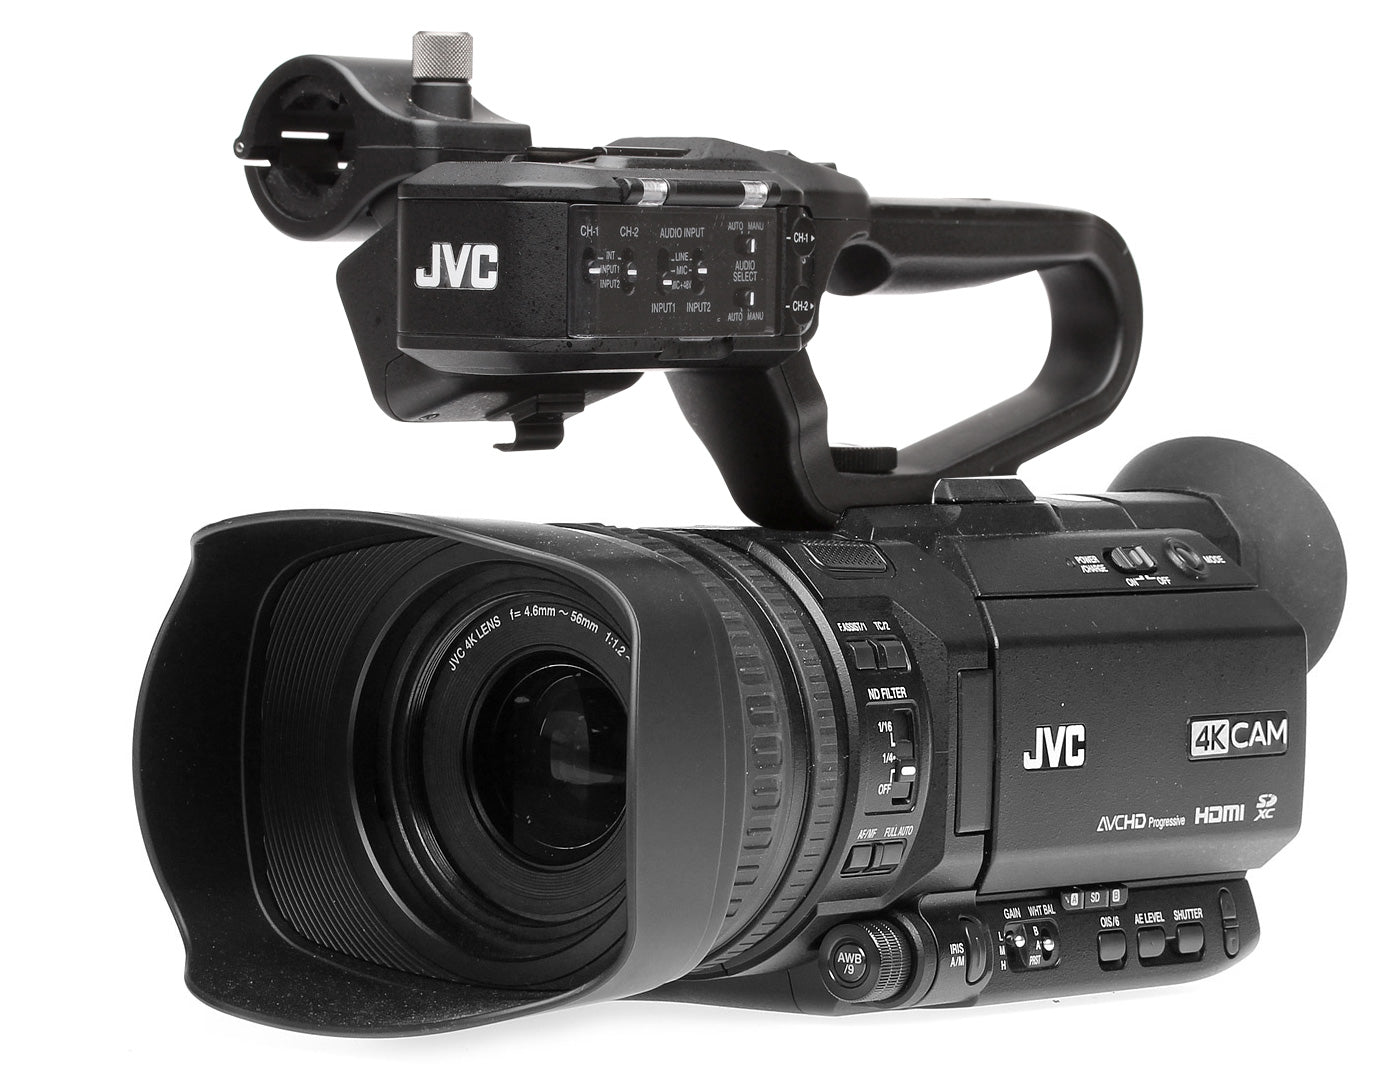 JVC GY-HM170U 4KCam Compact Handheld Camcorder with Integrated 12x Lens